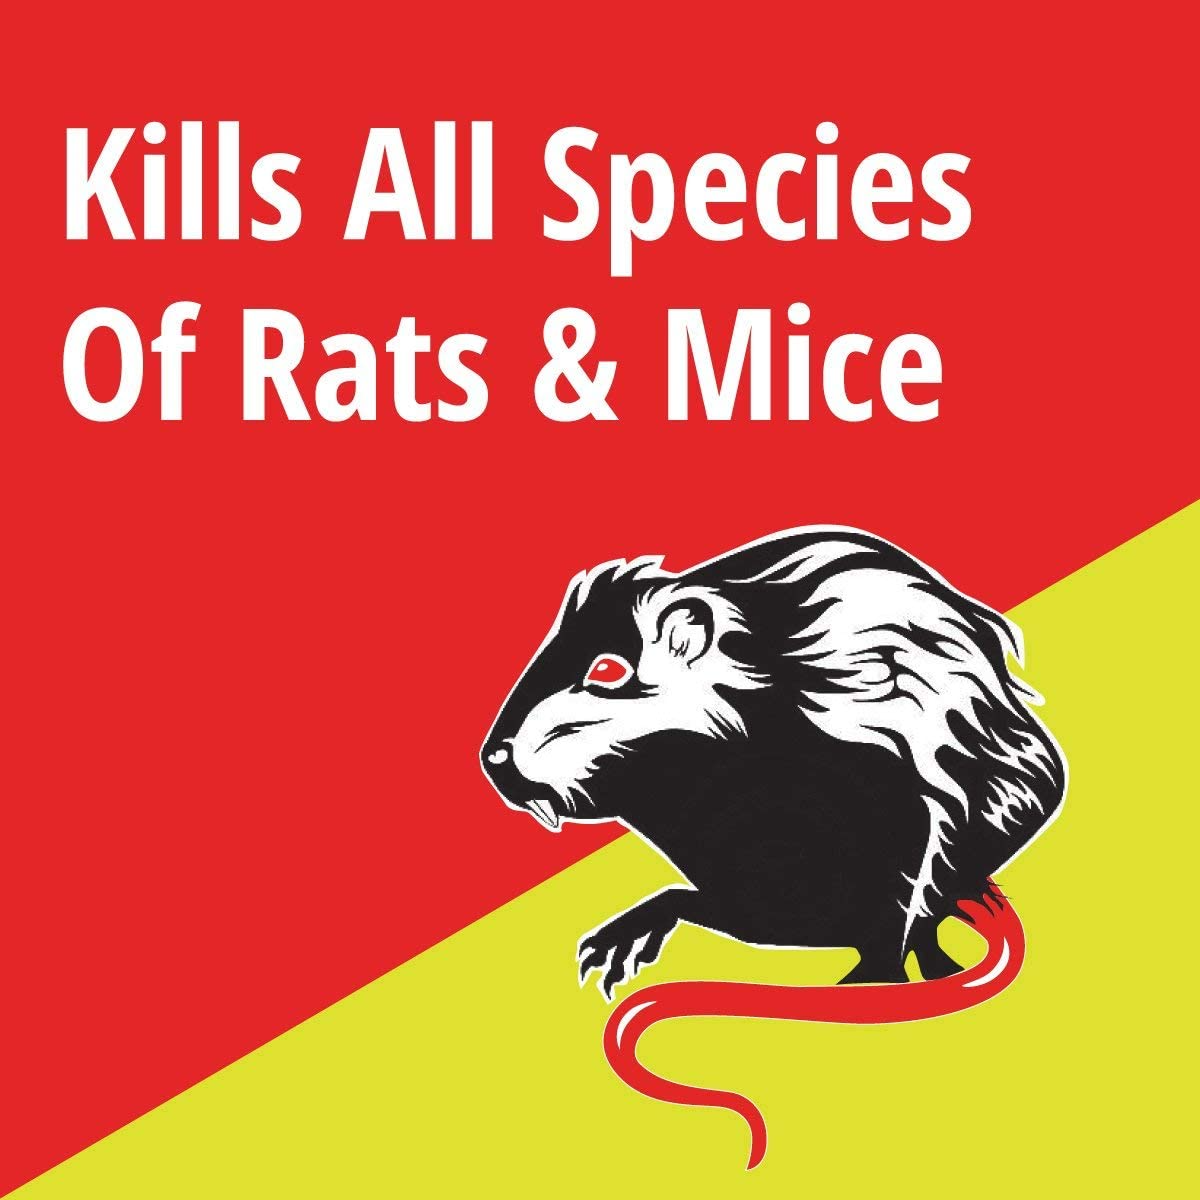 Rat Control Cake | Ready to use wax block for the control of Rats and Mice | New Generation Rodenticide | Rats tend to die outside 100GMX2